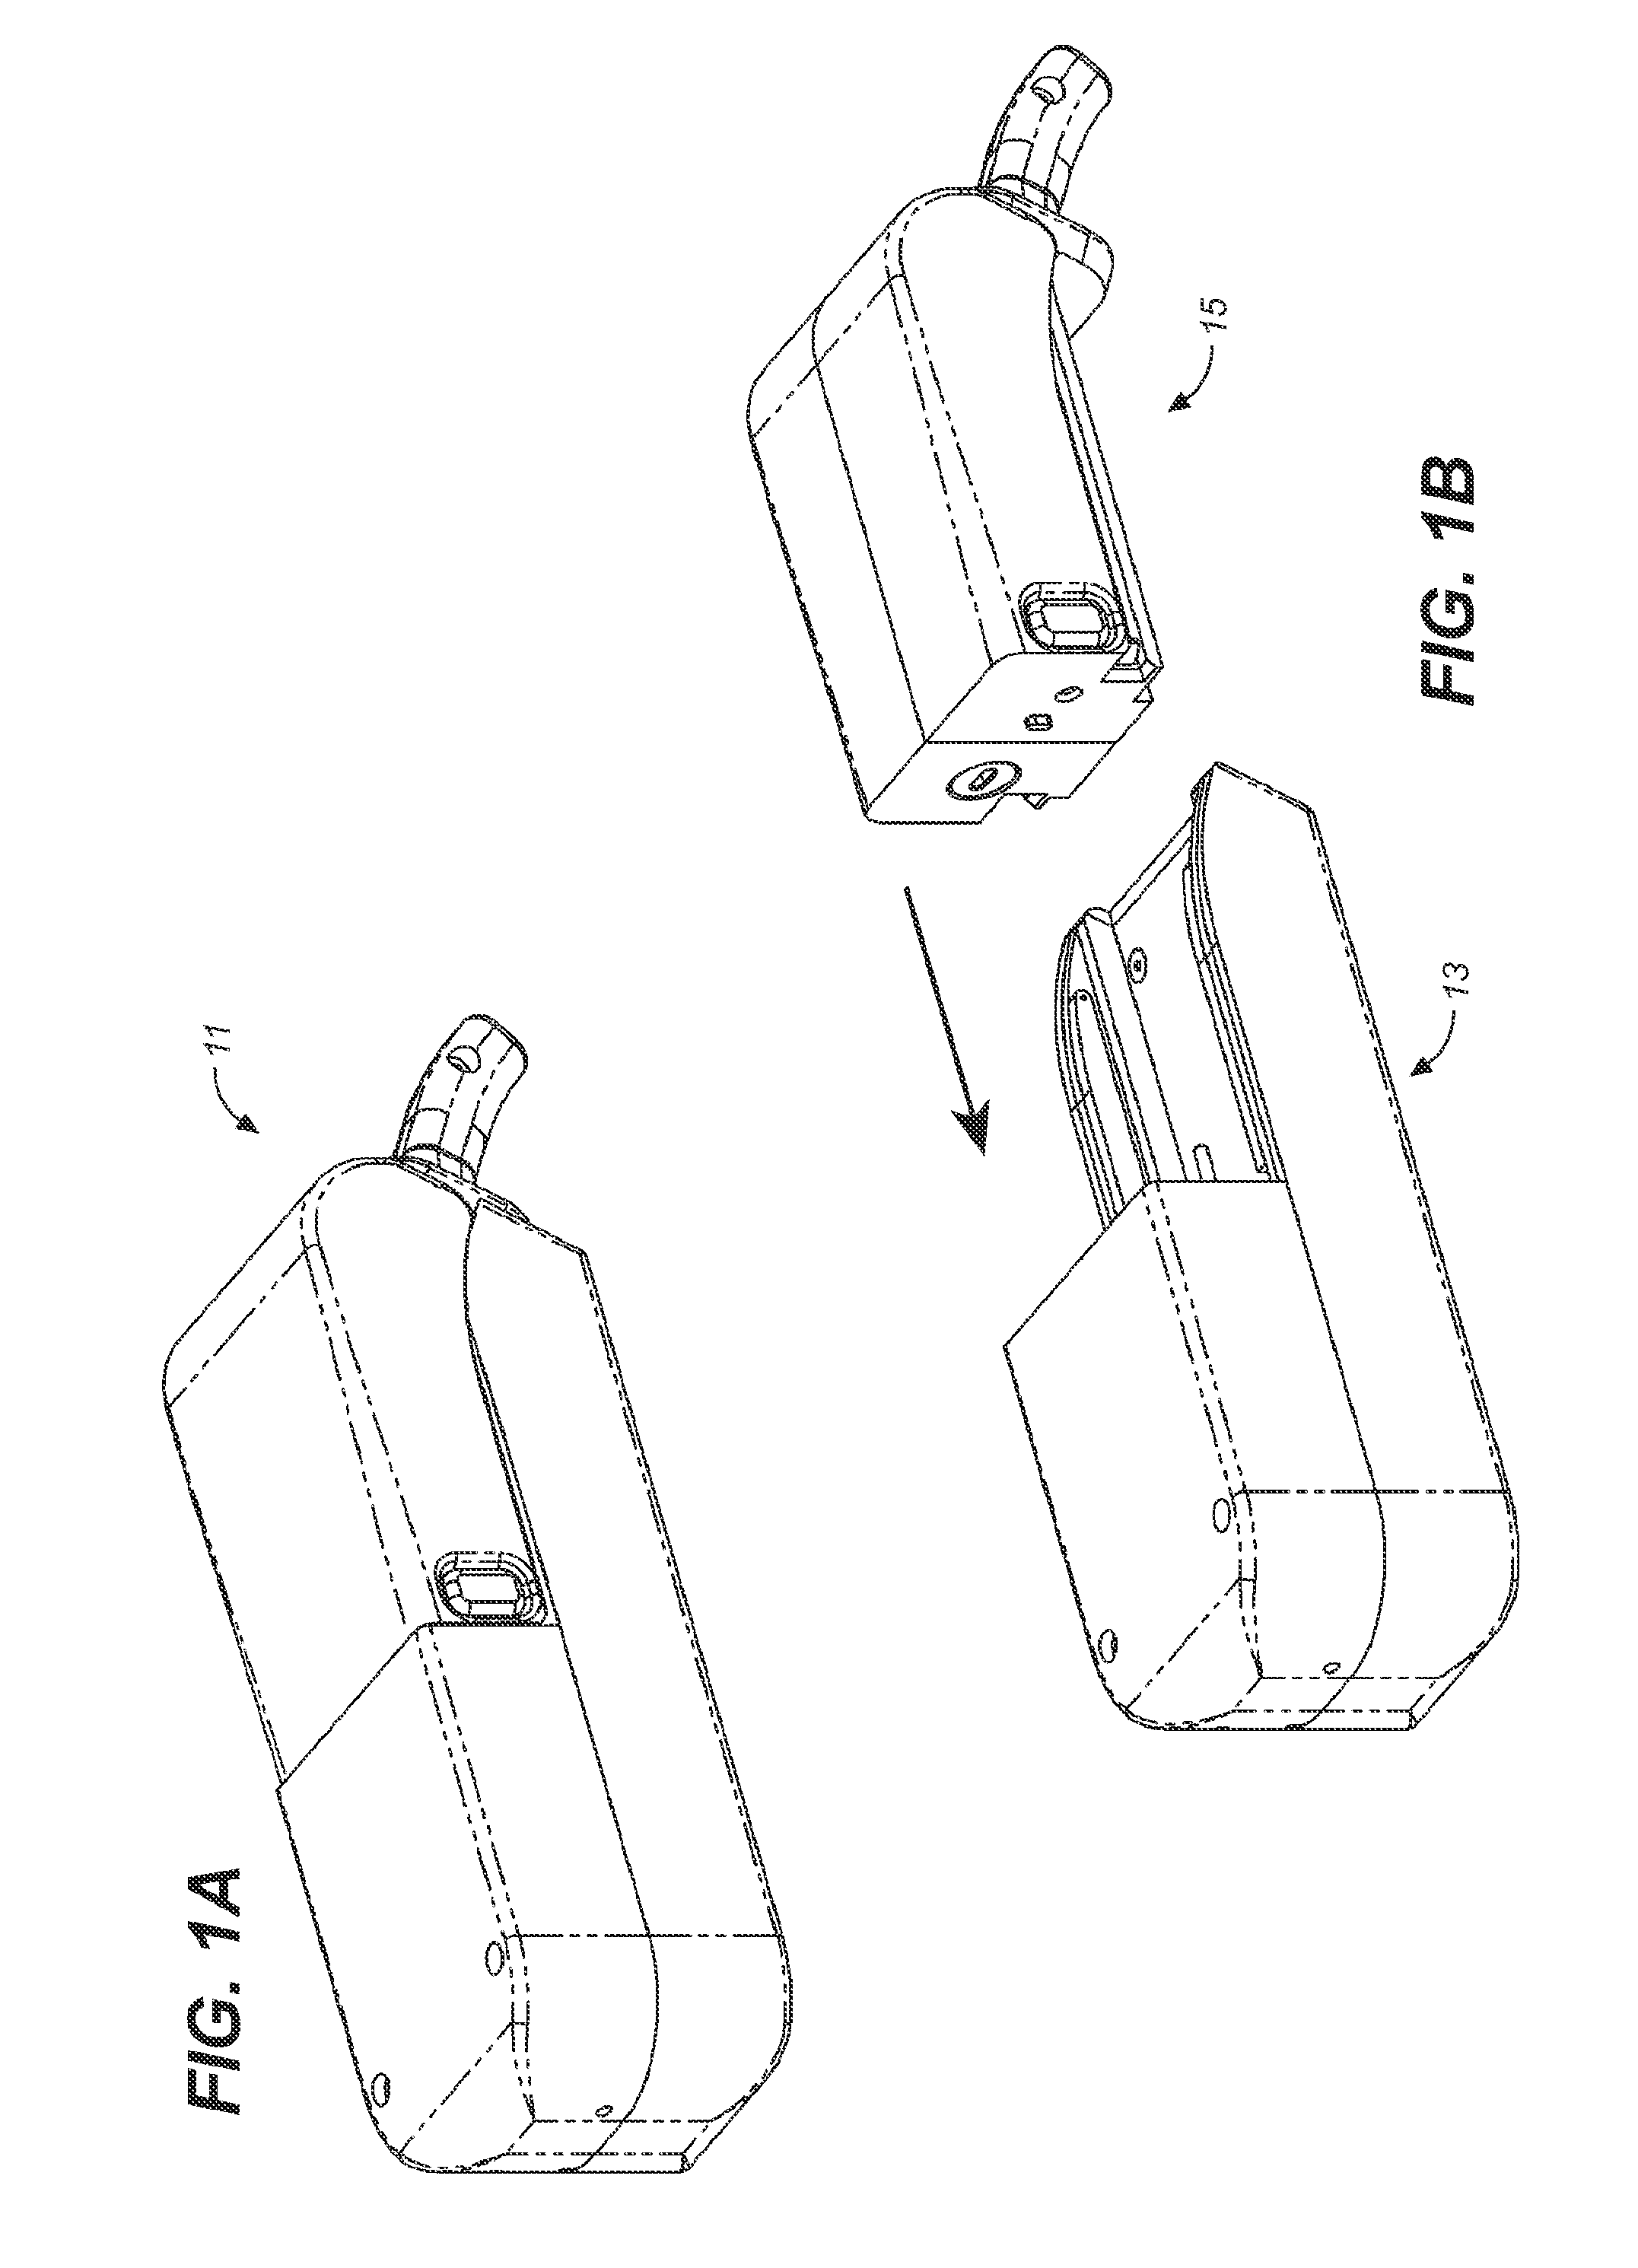 Storage and Dispensing Devices for Administration of Oral Transmucosal Dosage Forms